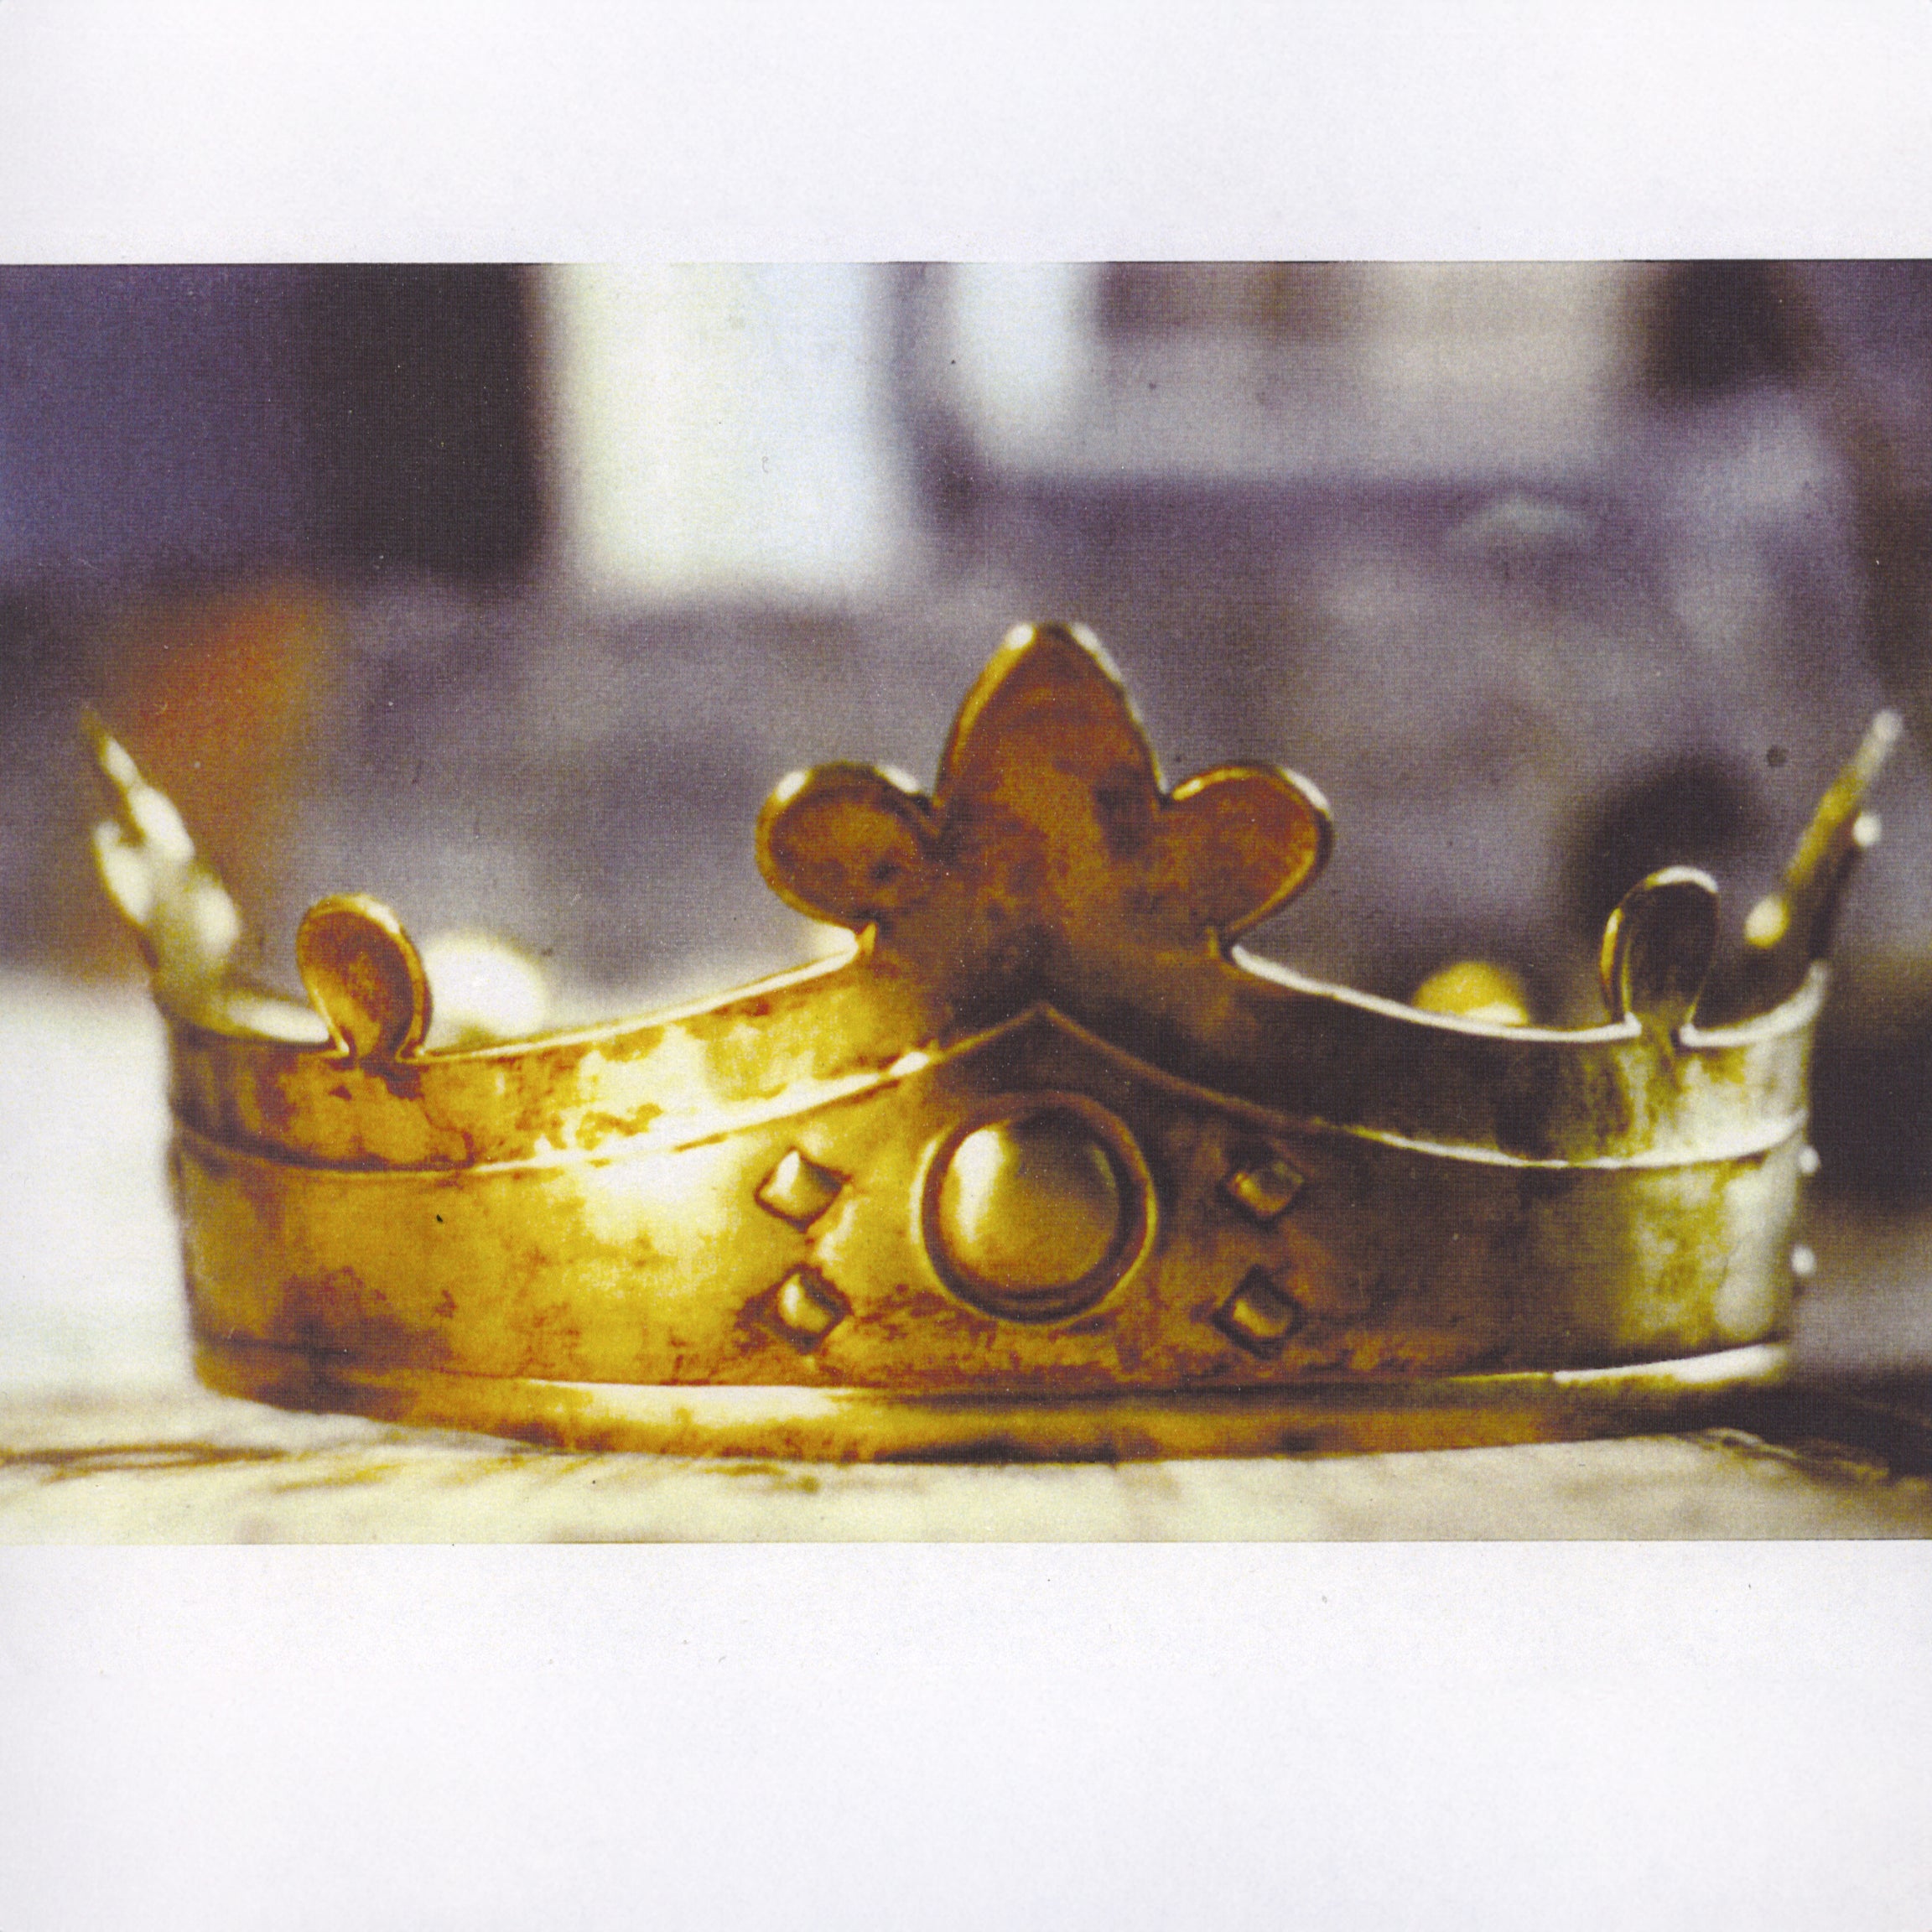 Gold Crown made for the BBC Costume Dept